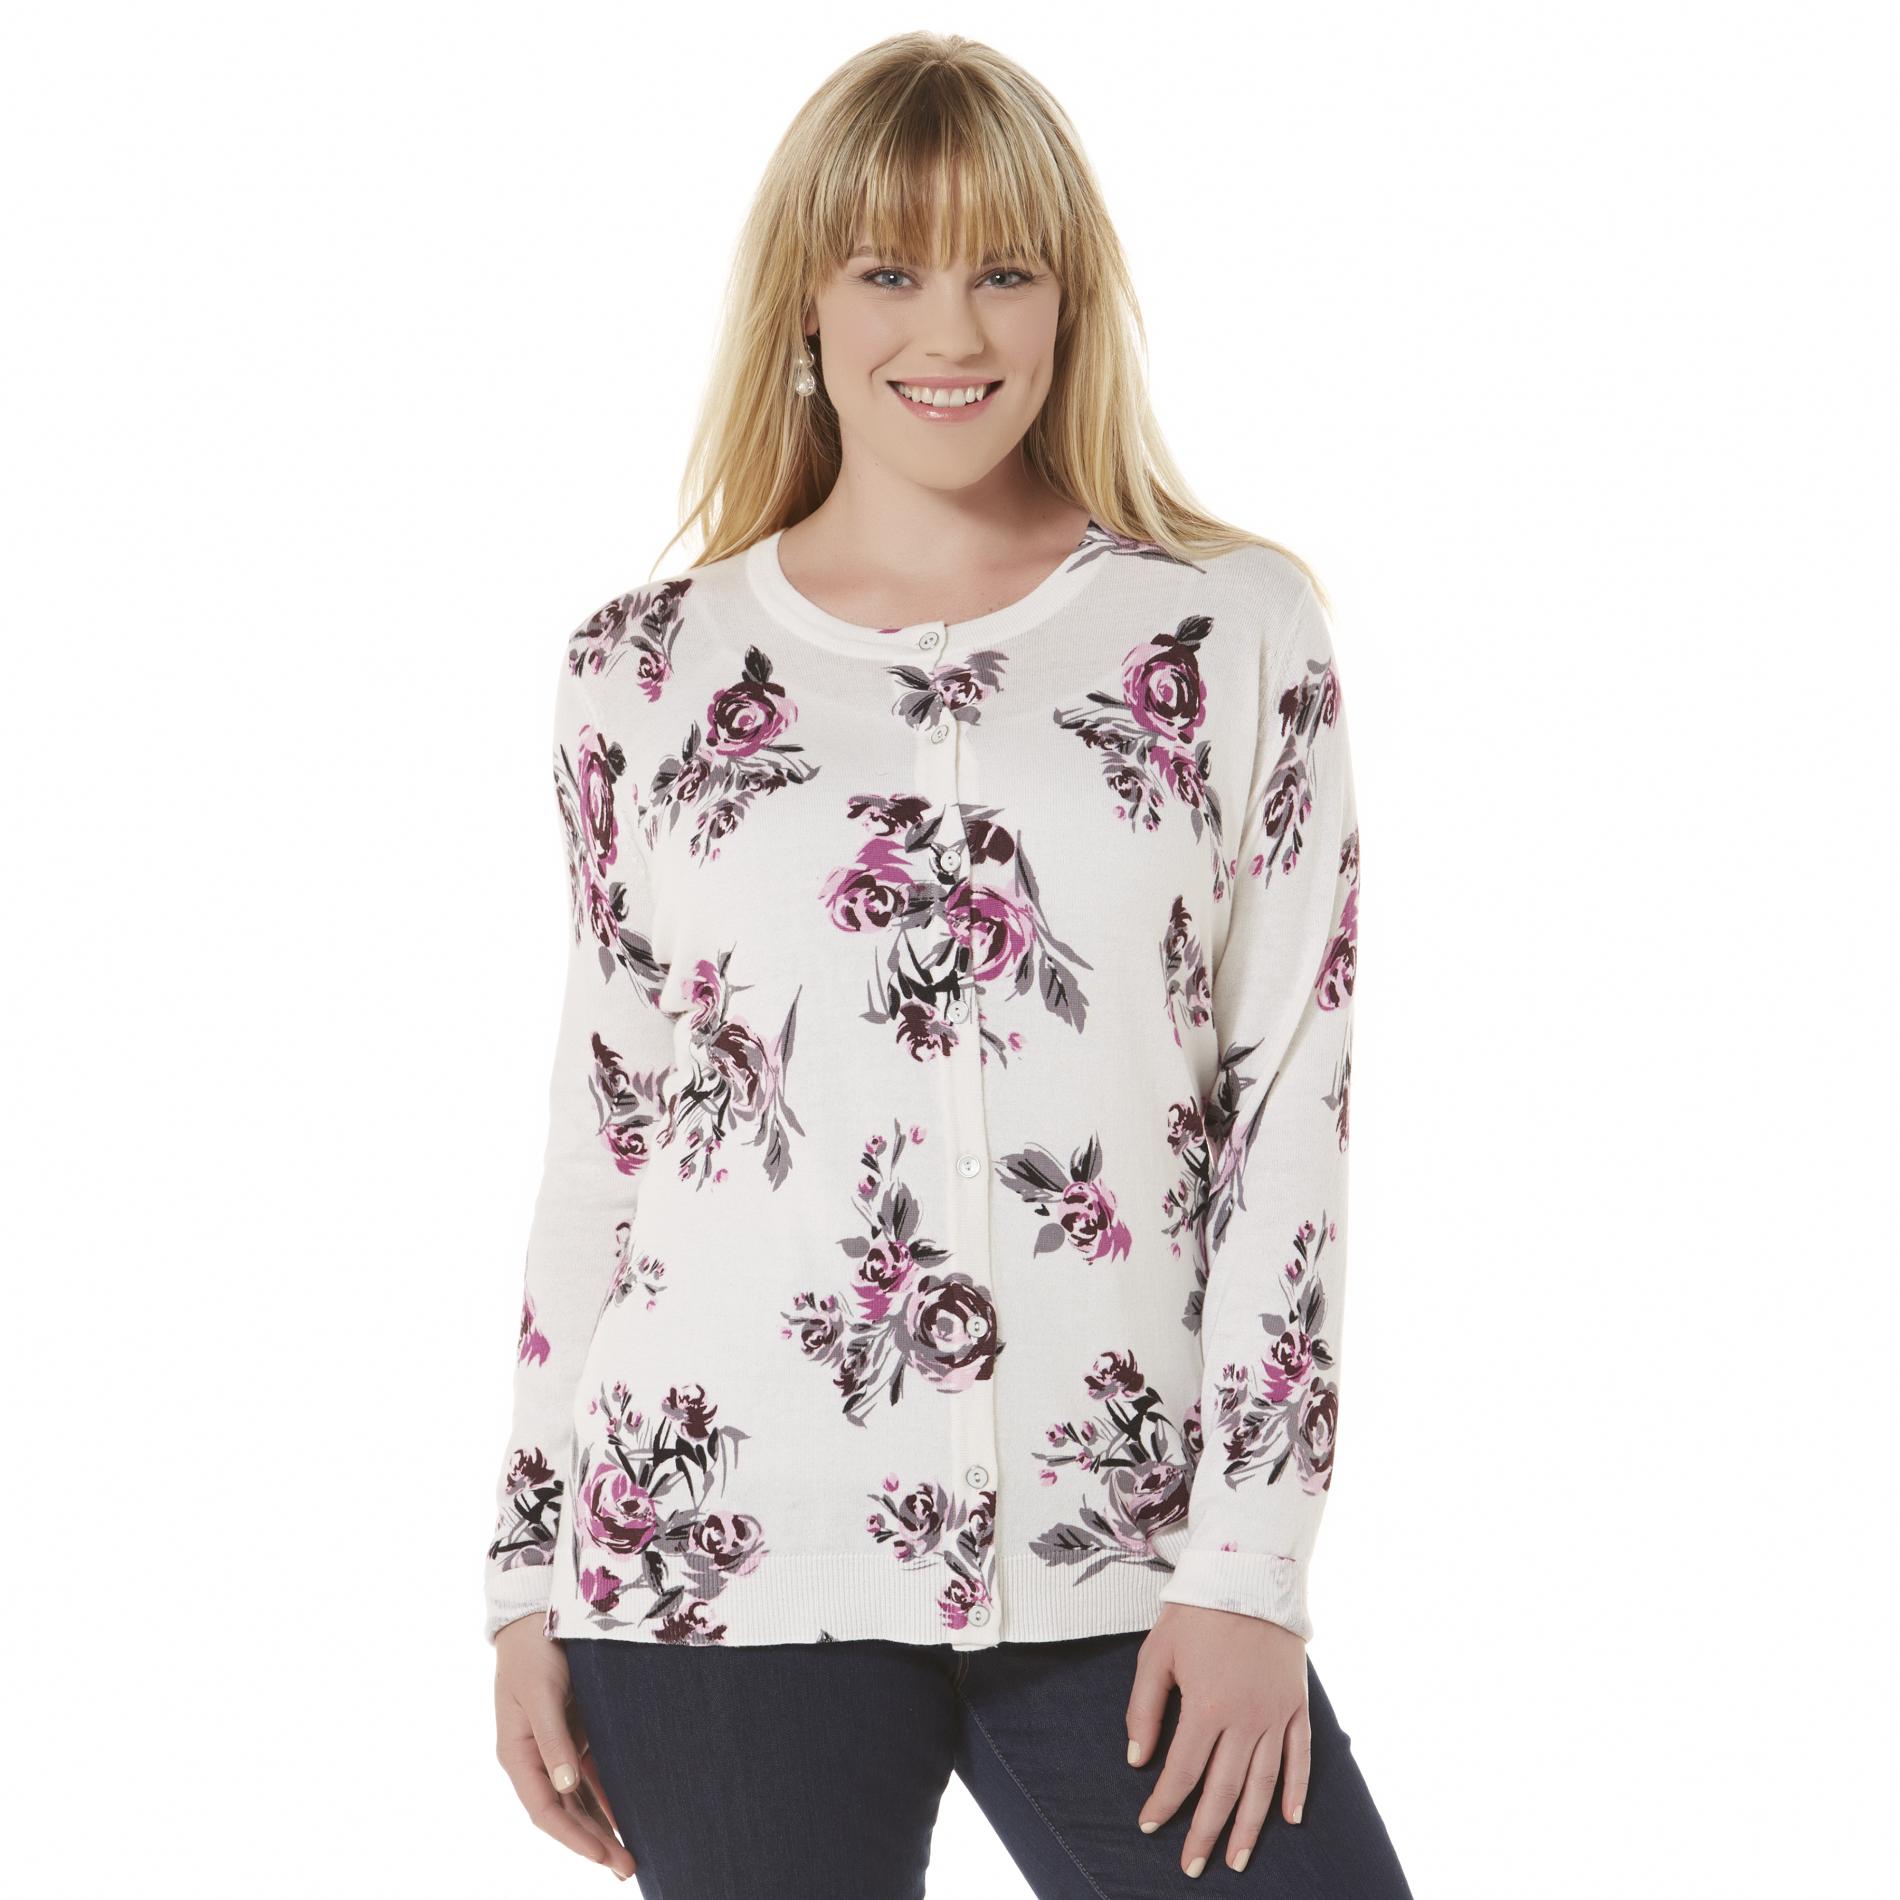 Basic Editions Women's Plus Cardigan Sweater - Floral